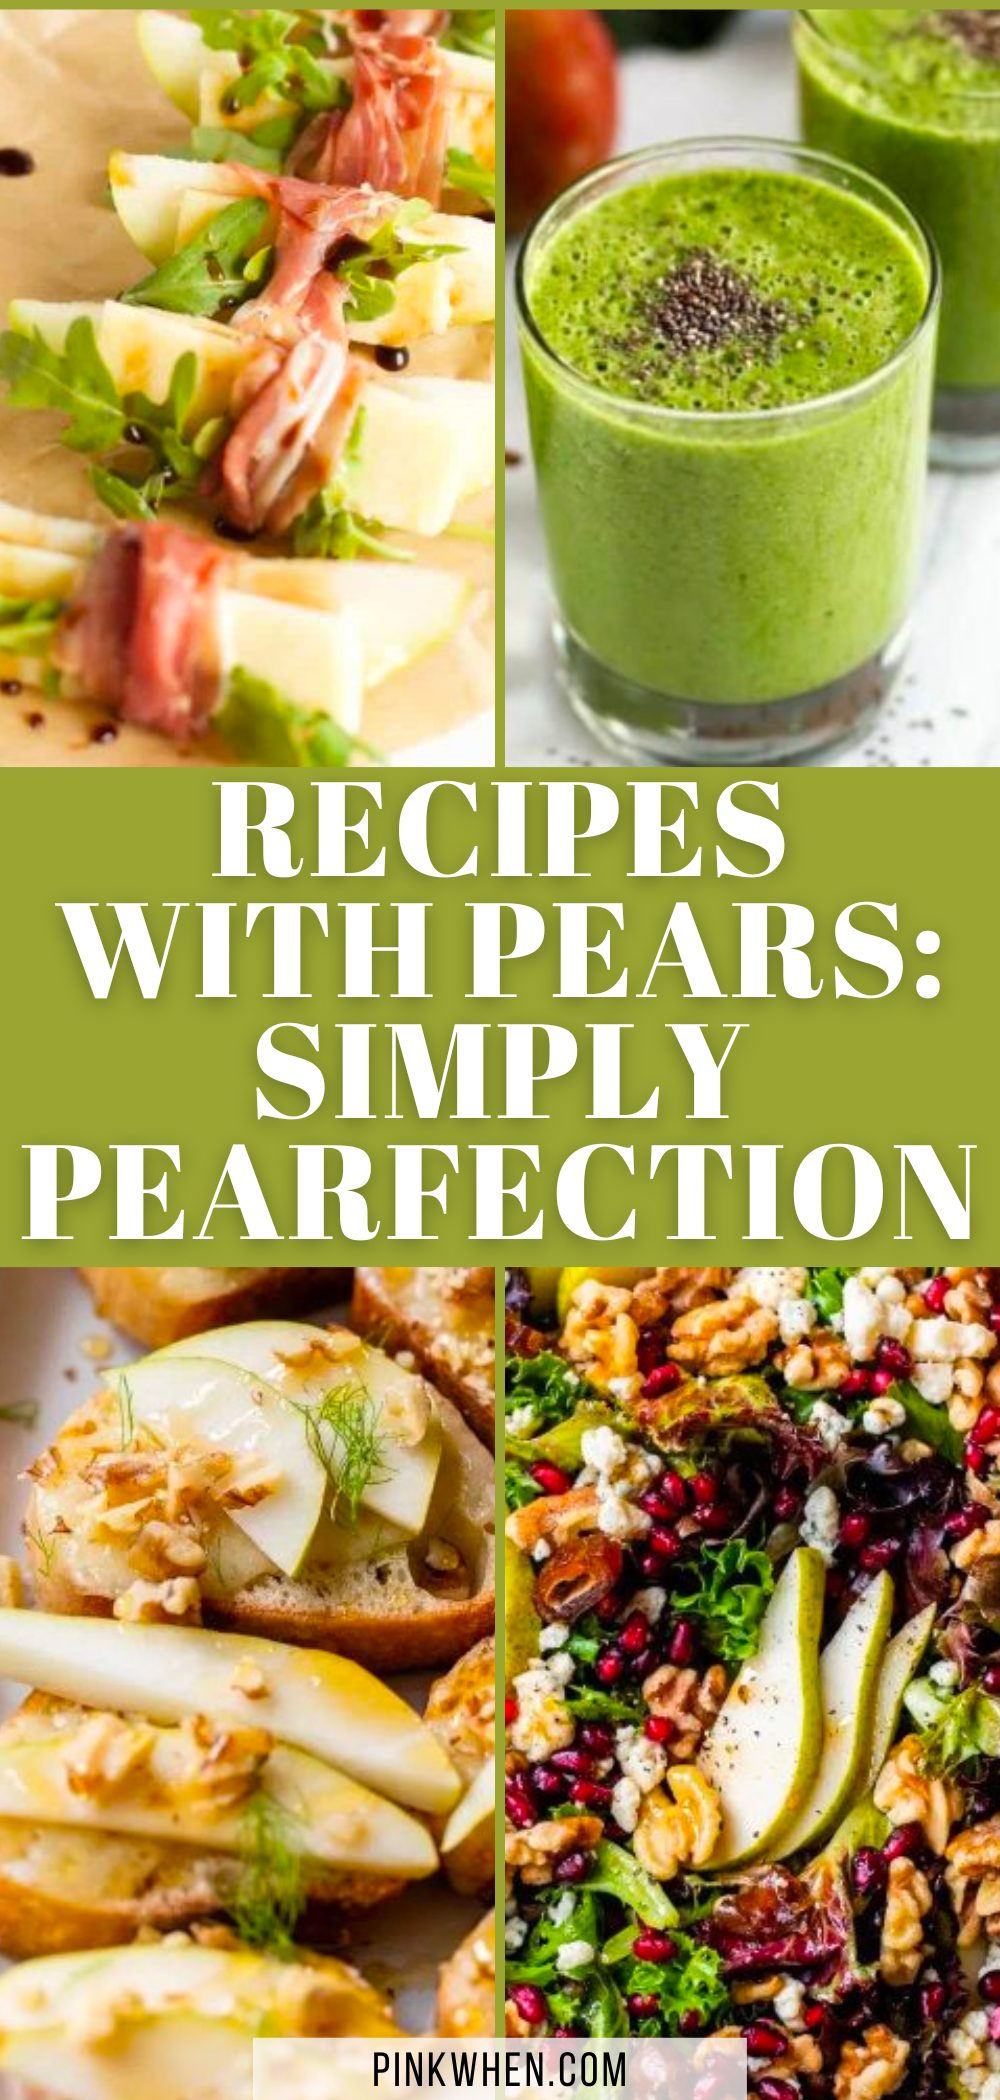 Recipes with Pears: Simply Pearfection